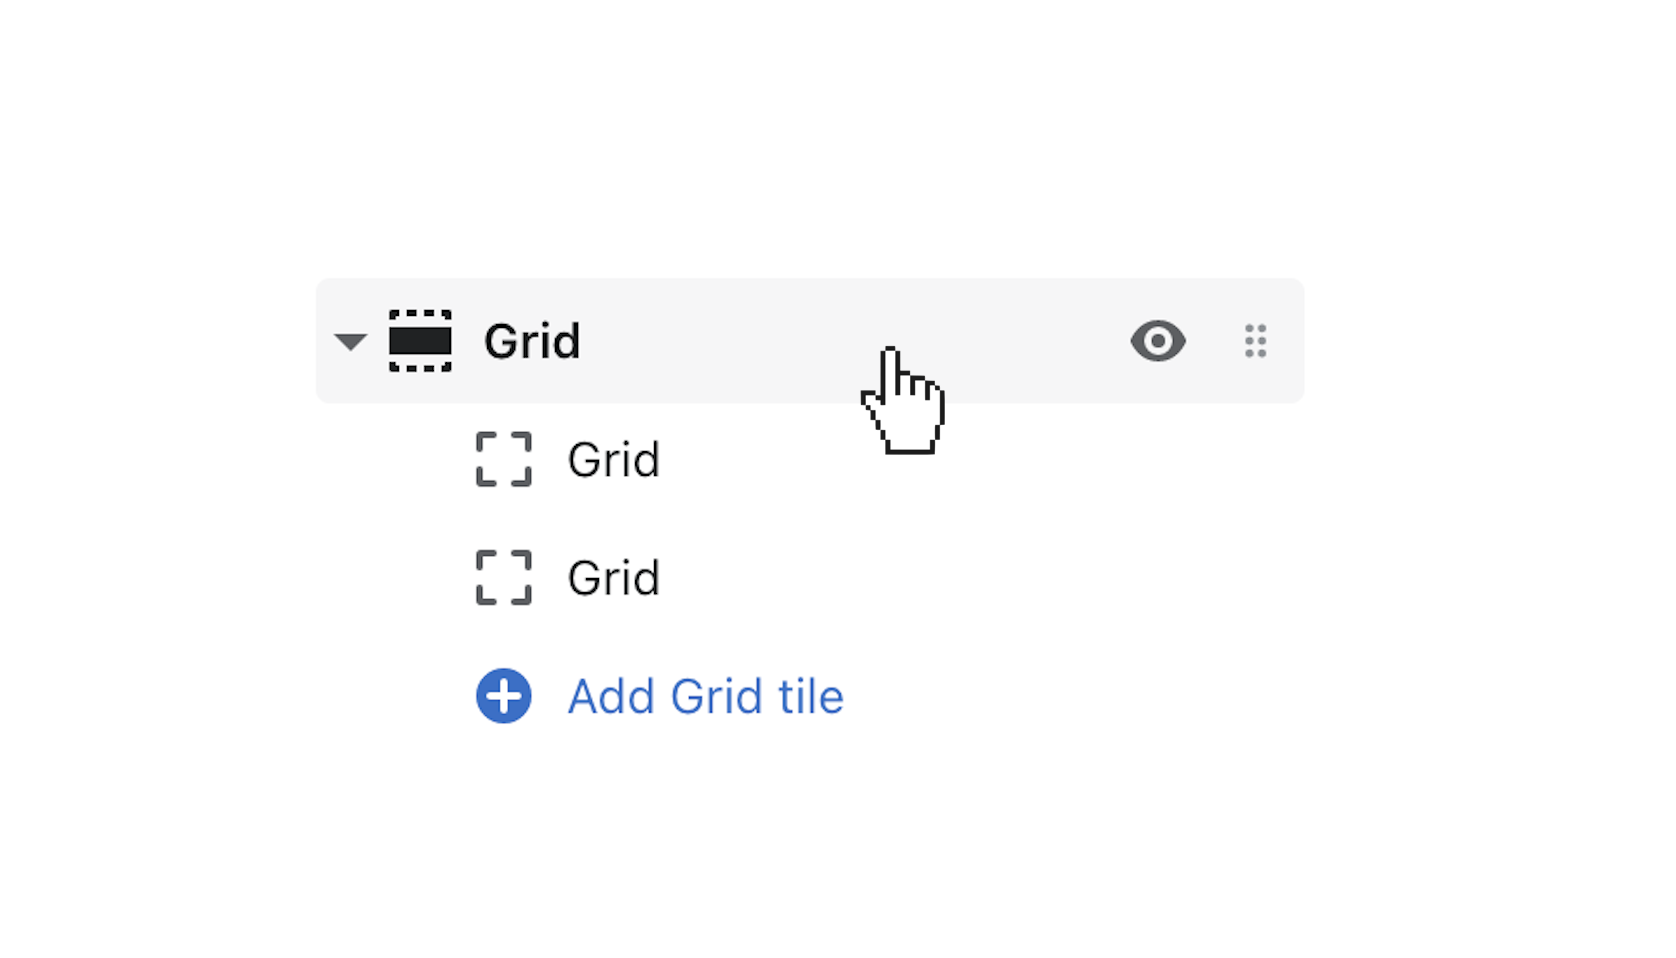 click_the_grid_section_to_open_its_general_settings.png